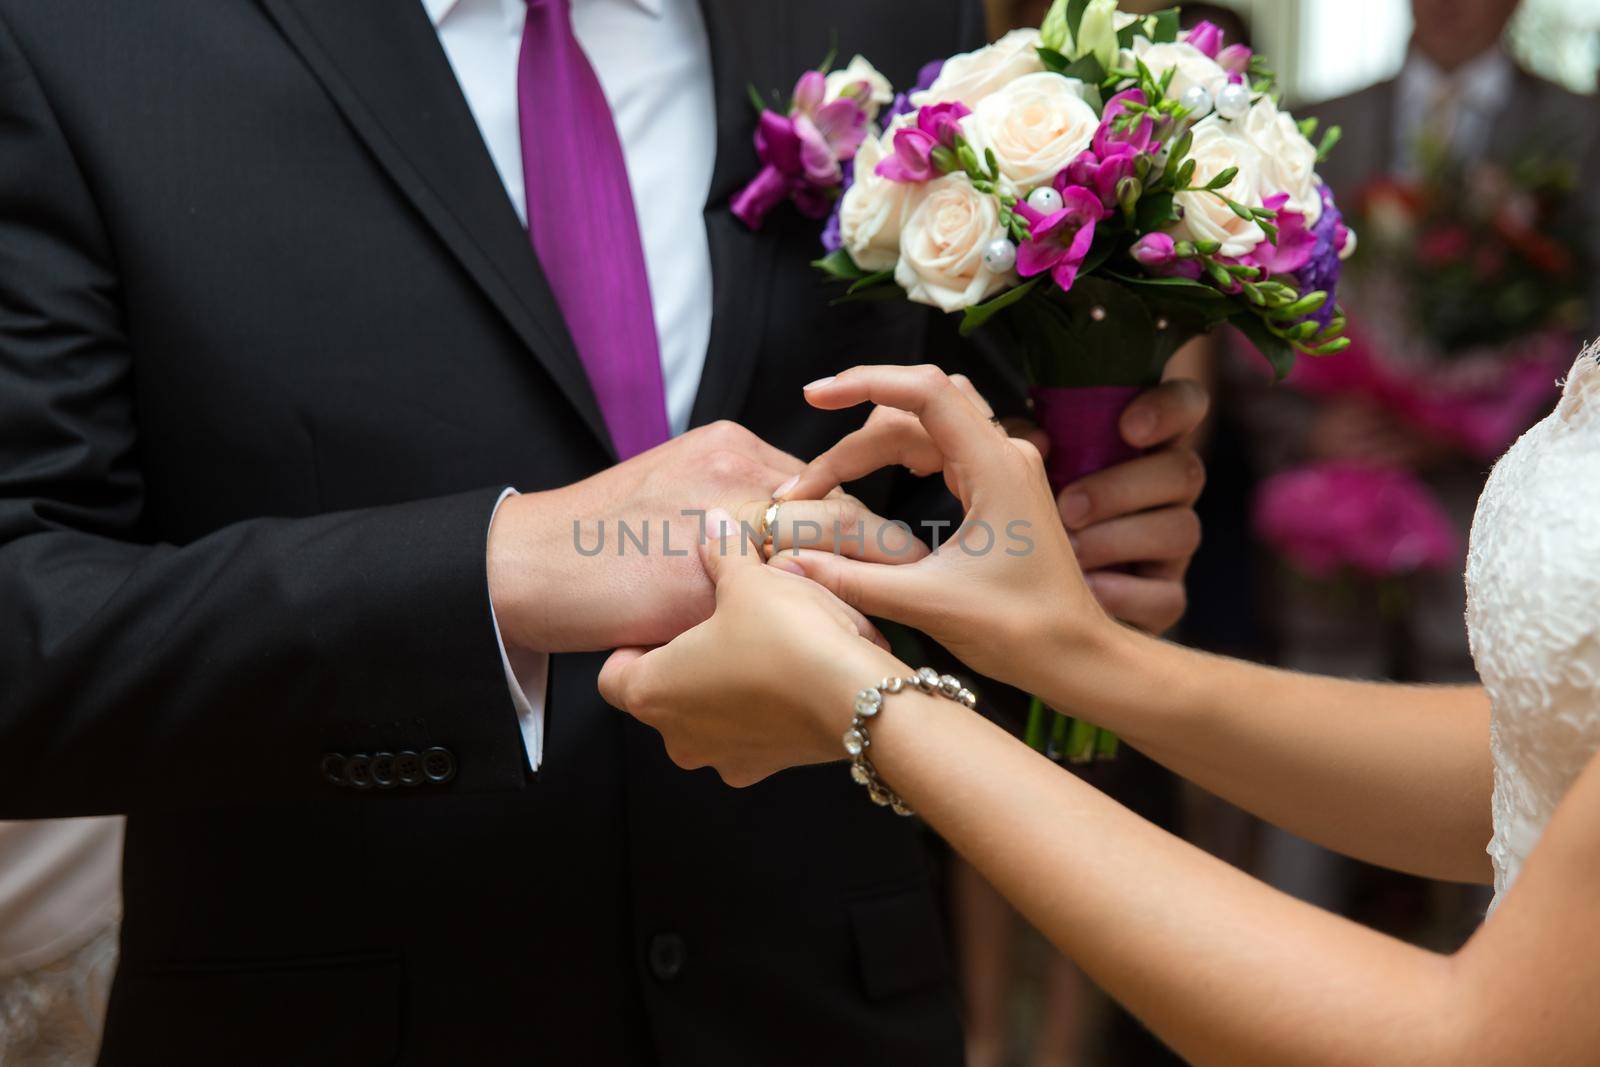 Bride putting a ring on groom's finger during wedding ceremony